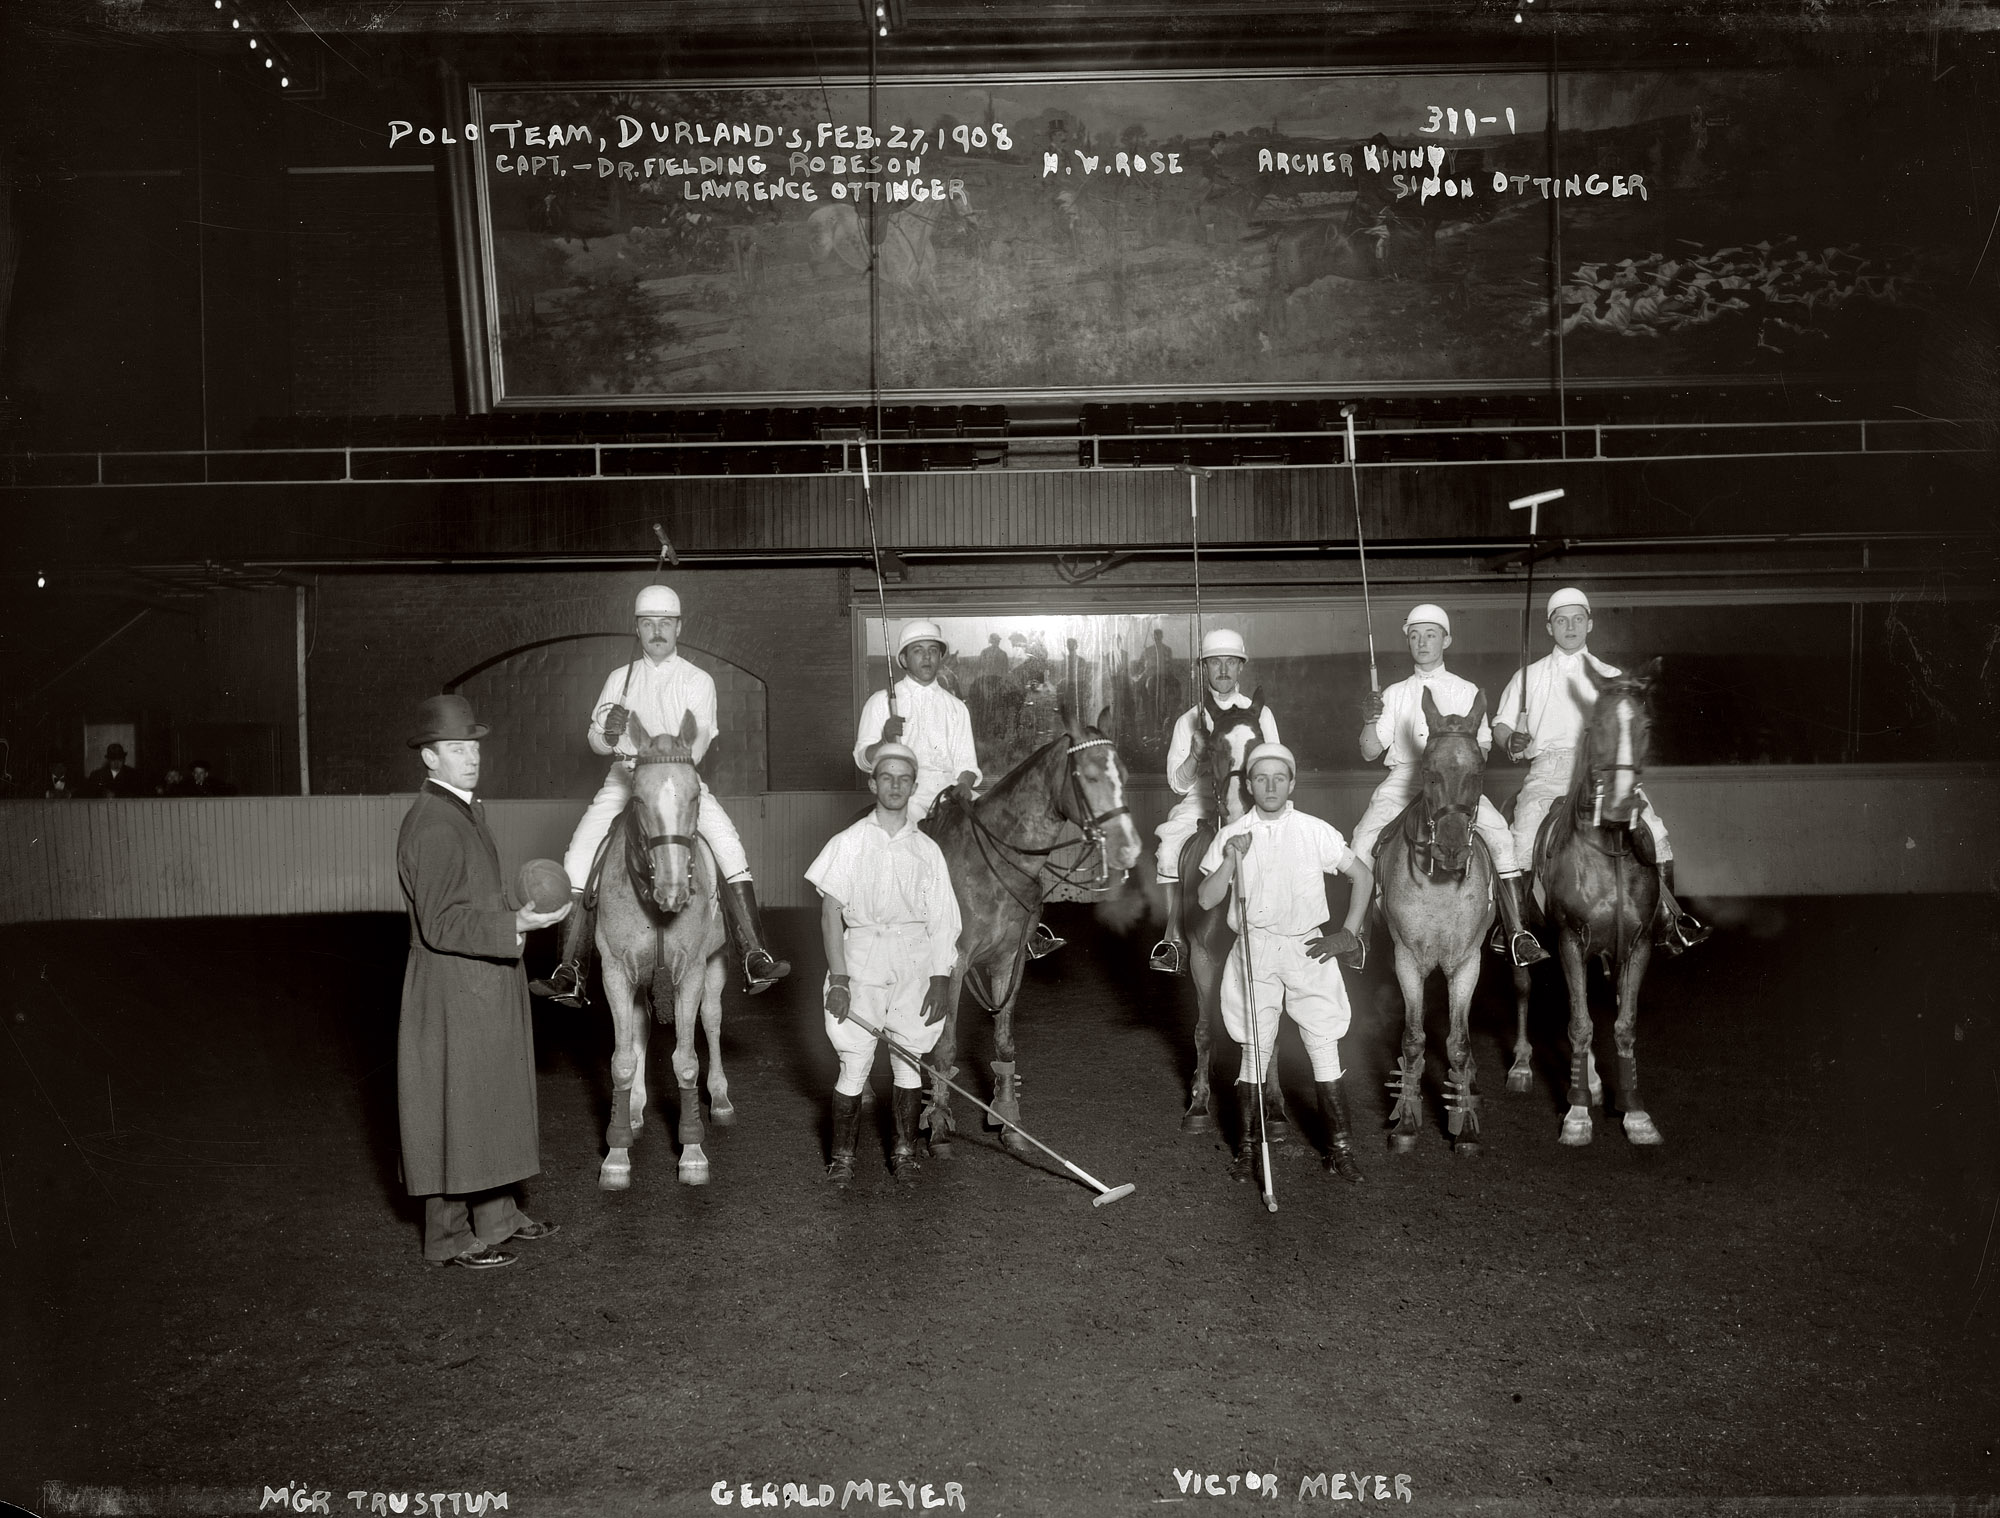 "Polo Team, Durland's Riding Academy, 1908: Cpt. Dr. Fielding Robeson, N.W. Rose, Archer Kinney, Lawrence & Simon Ottinger, Mgr. Trusttum, Gerald & Victor Meyer." 8x10 glass negative, G.G. Bain Collection. View full size.